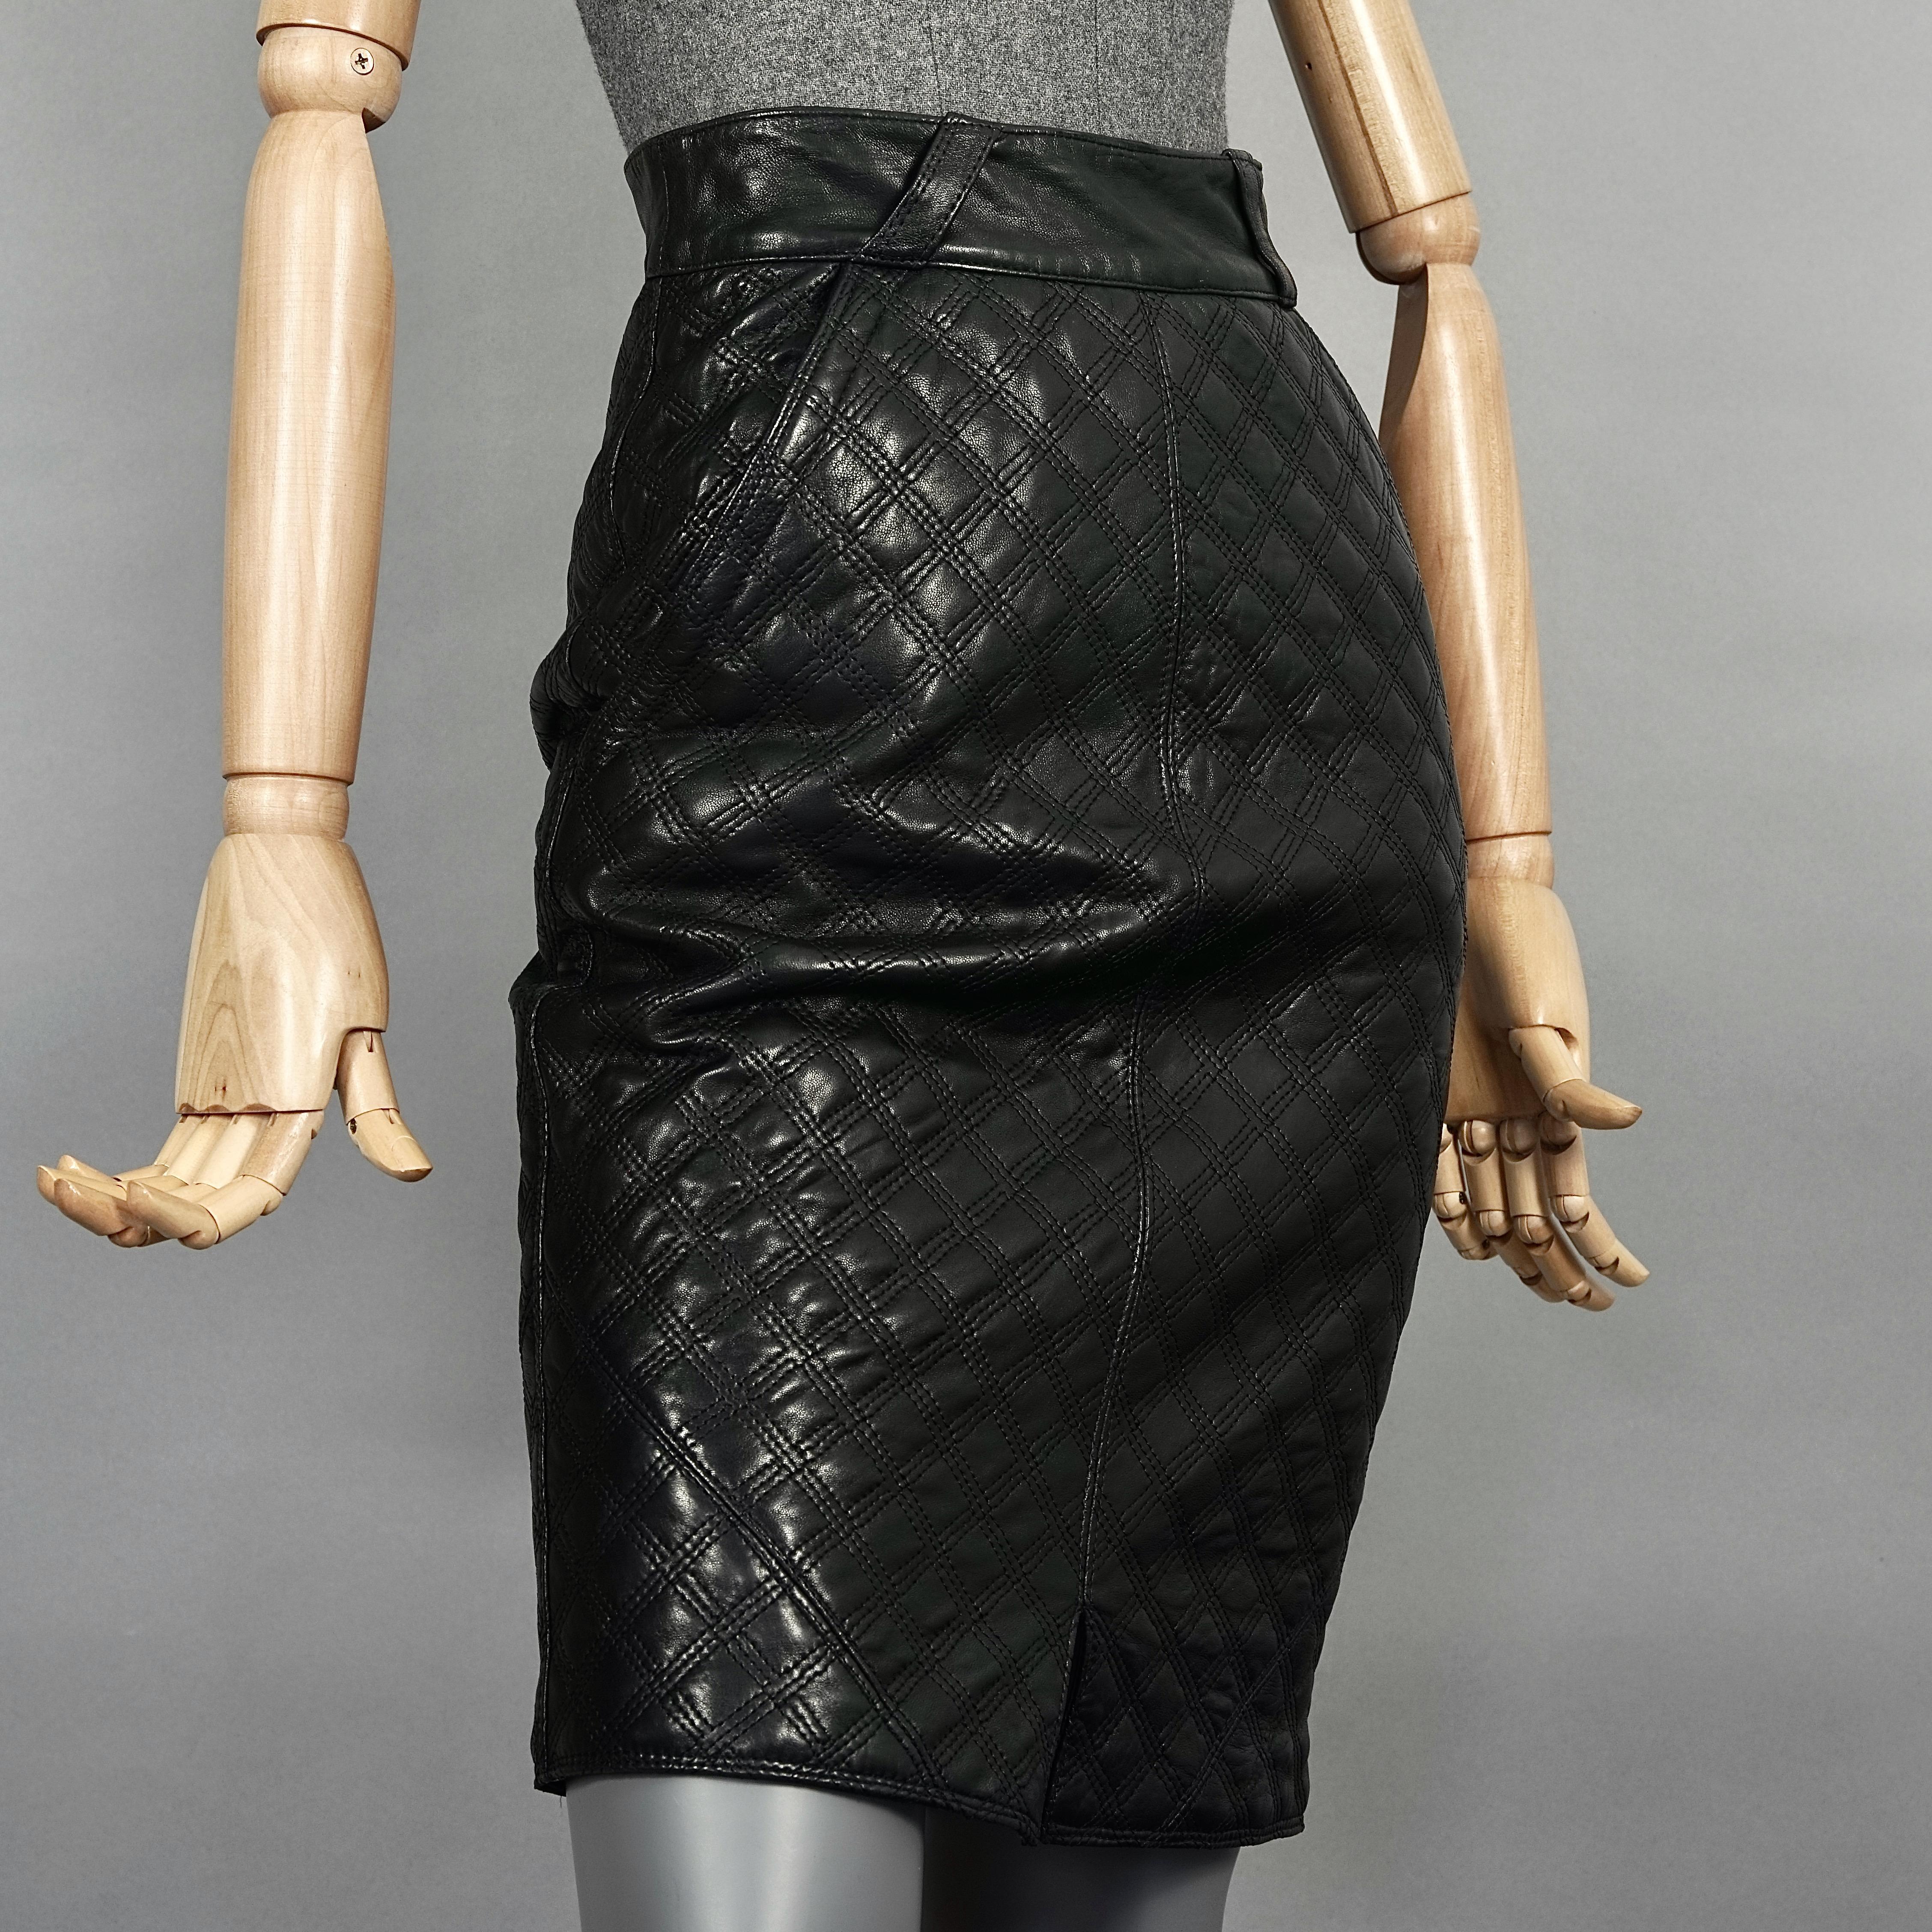 Vintage 1990s GIANNI VERSACE Black Quilted Leather Skirt

Measurements taken laid flat, please double waist and hips:
Waist: 12.60 inches (32 cm)
Hips: 17.32 inches (44 cm)
Length: 22.83 inches (58 cm)

Features:
- 100% Authetntic GIANNI VERSACE.
-